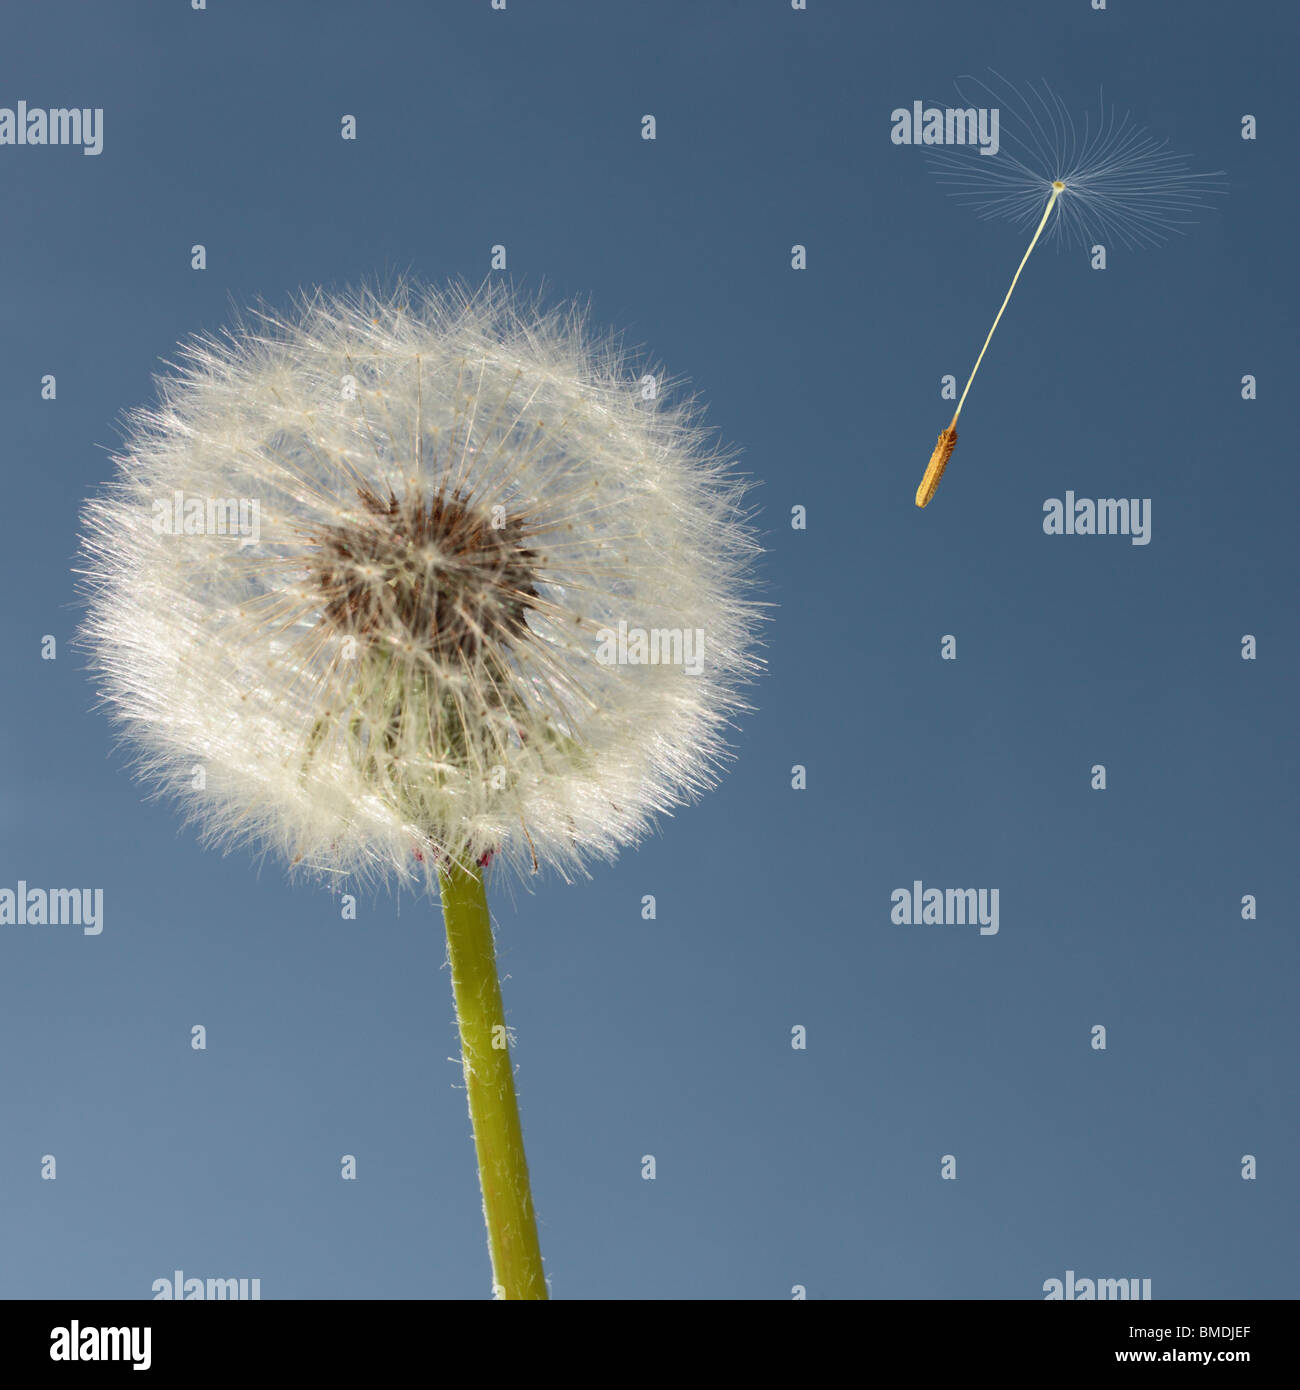 Dandelion head close up with digitally added seeds set against a cloudless blue sky. Stock Photo